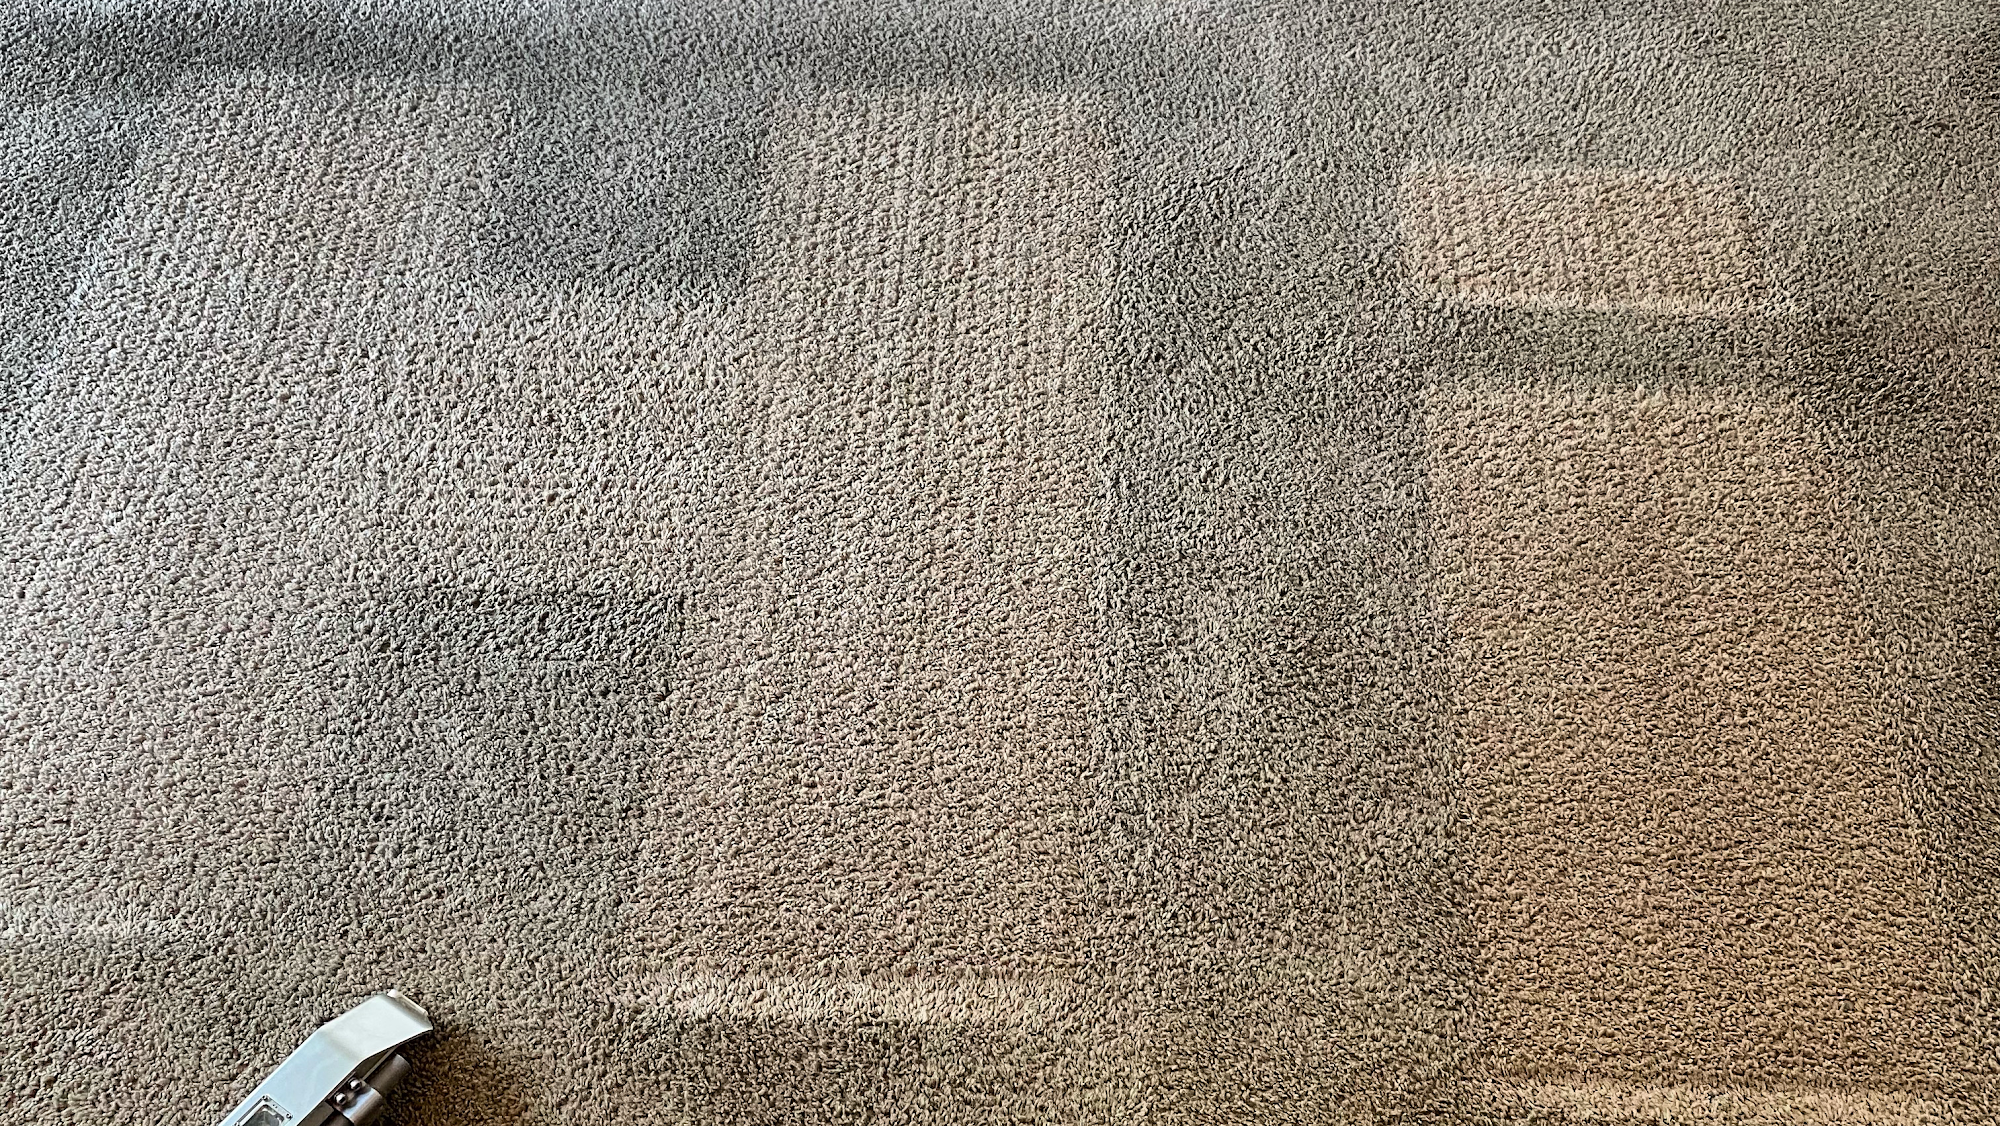 SOMD Carpet Cleaning